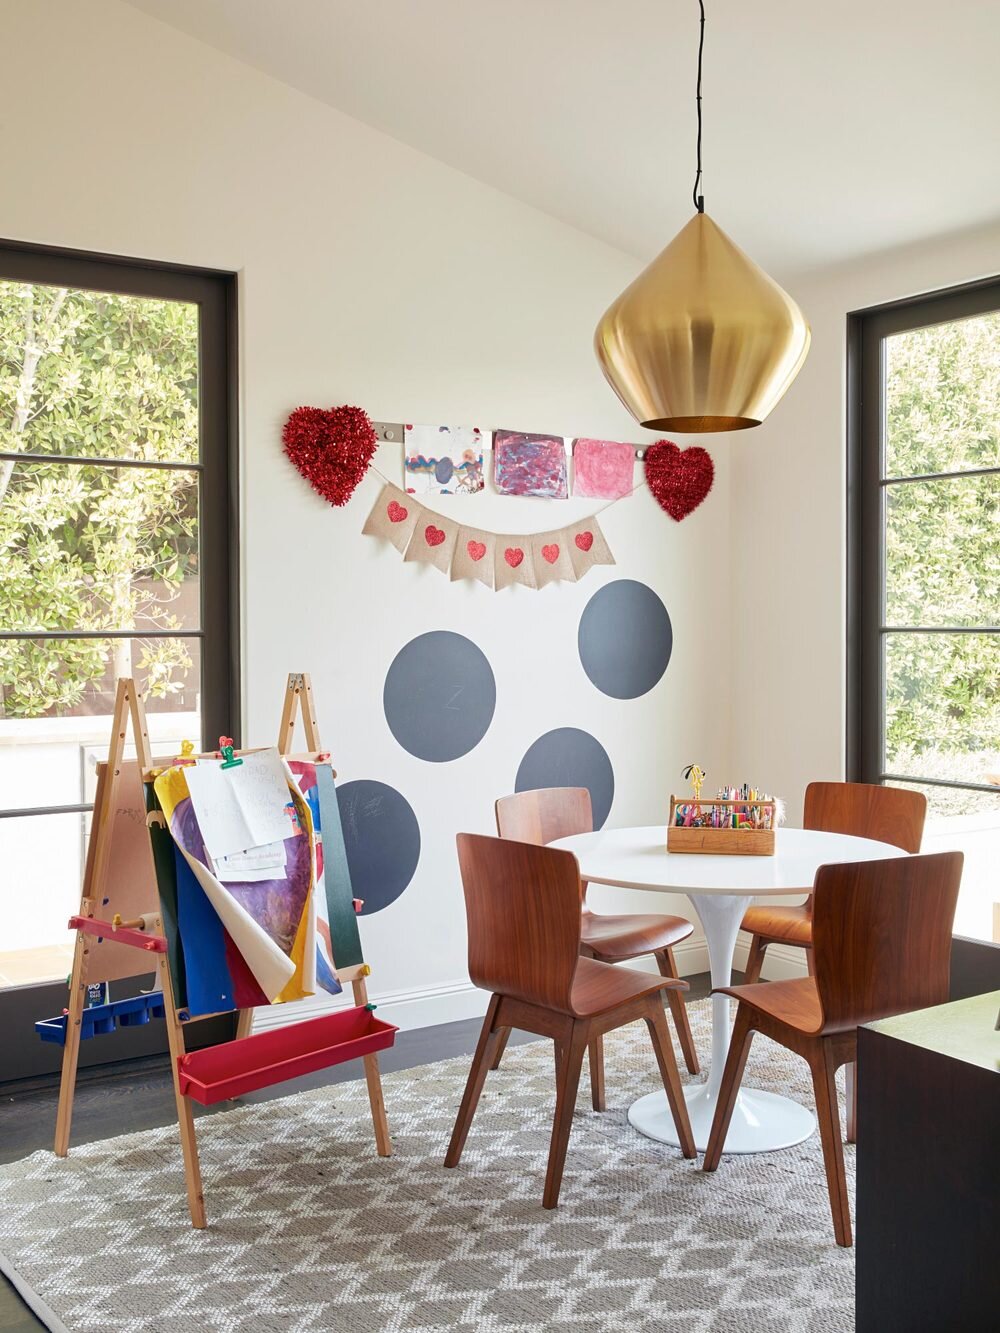  Best general contractor builder traditional Spanish Colonial estate home in the Brentwood neighborhood of Los Angeles with children’s play room featured in Architectural Digest.  